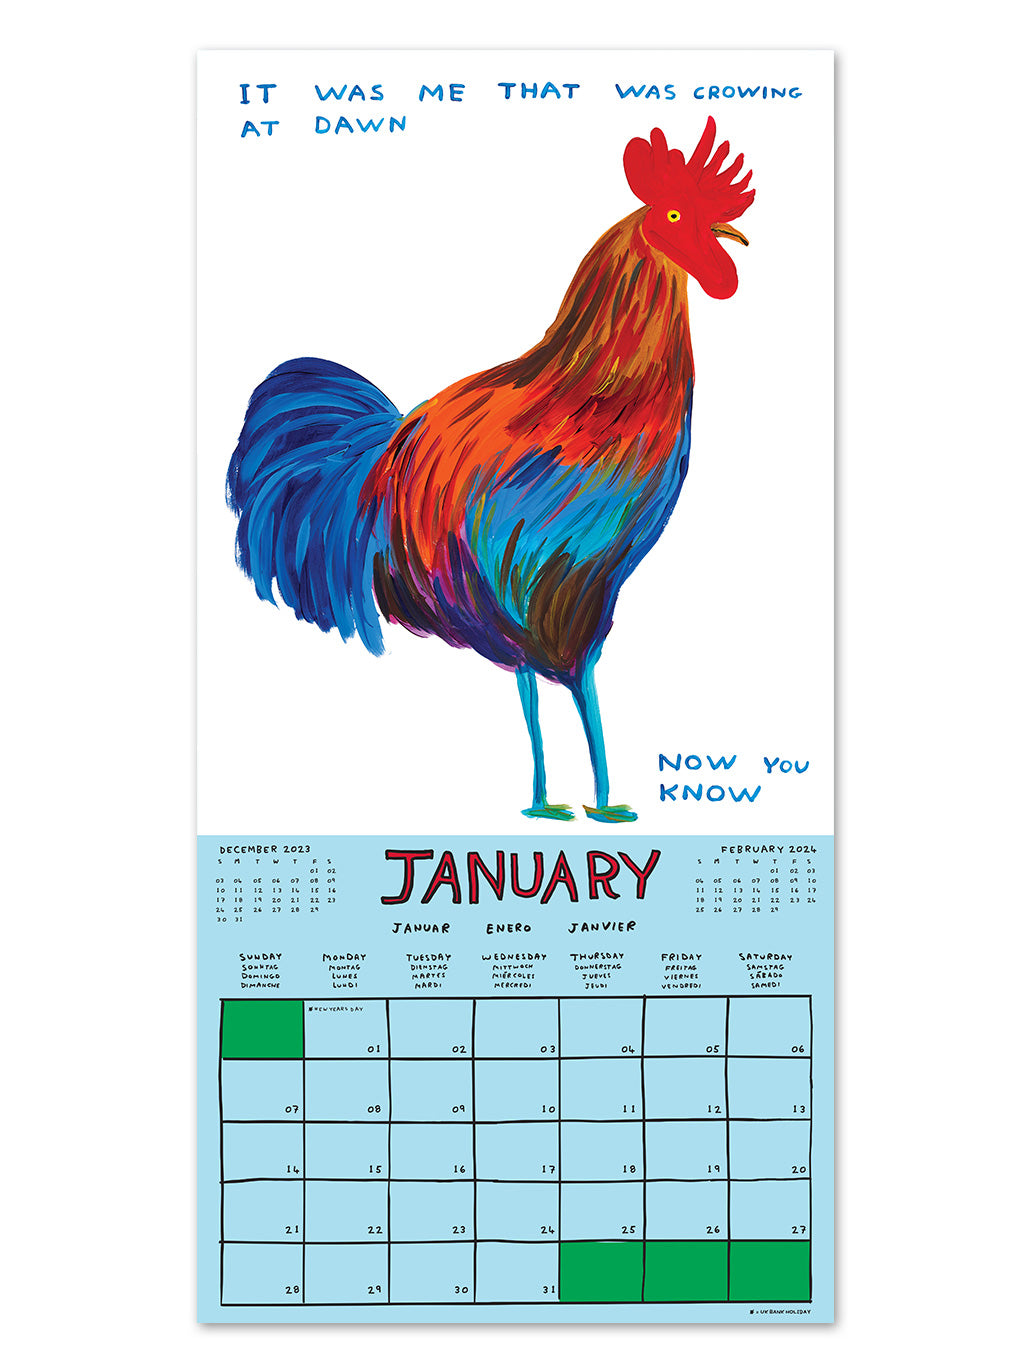 An example of the layout of a 2024 calendar by artist David Shrigley. January shows a light blue calendar section with a box allocated to each day of the month. The artwork on the top half of the page has a white background and shows a cockerel with the words - it was me that was crowing at dawn. Now You Know.